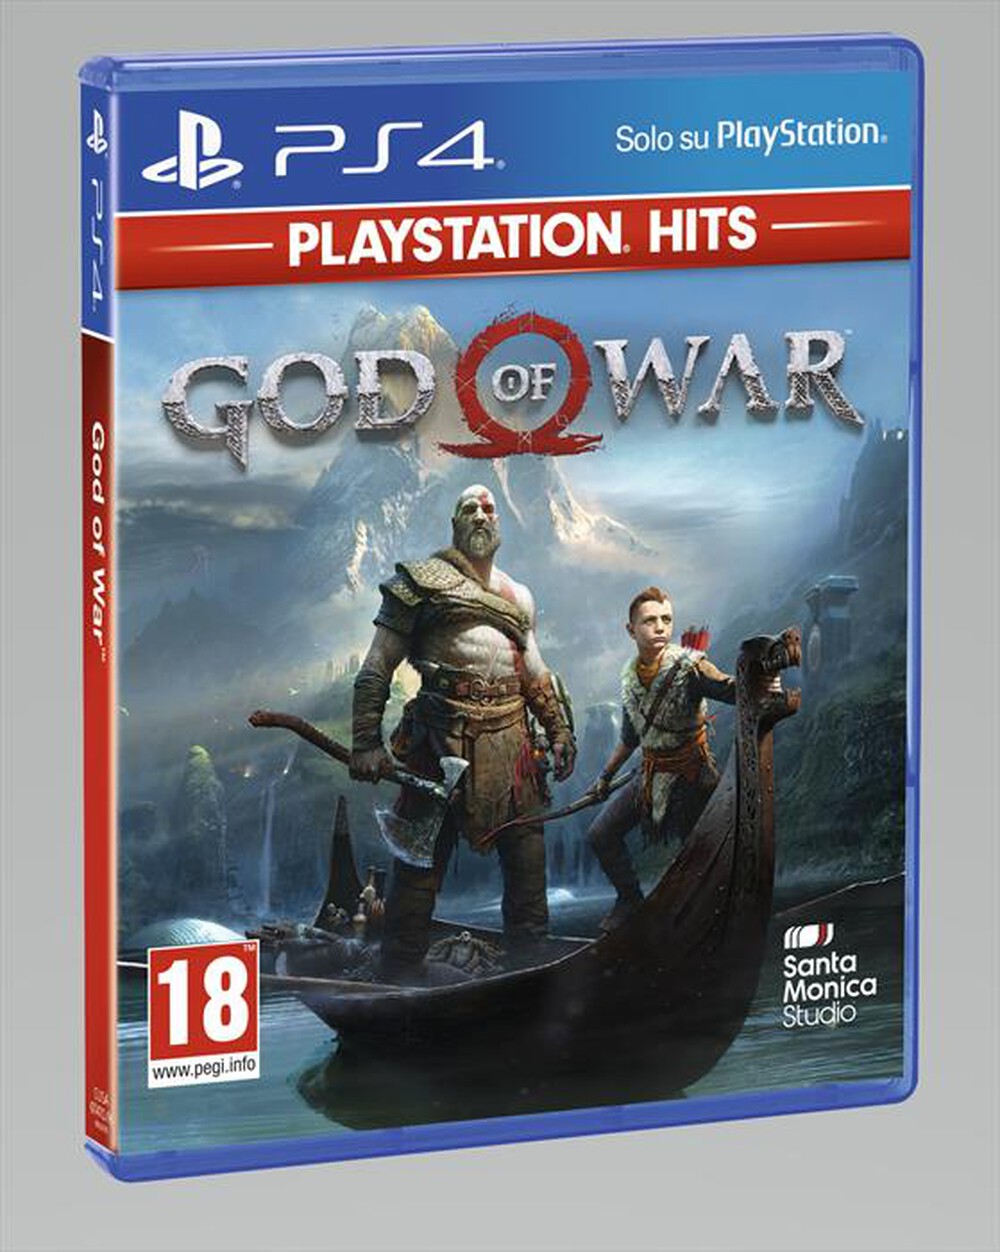 "SONY COMPUTER - GOD OF WAR HITS PS4"